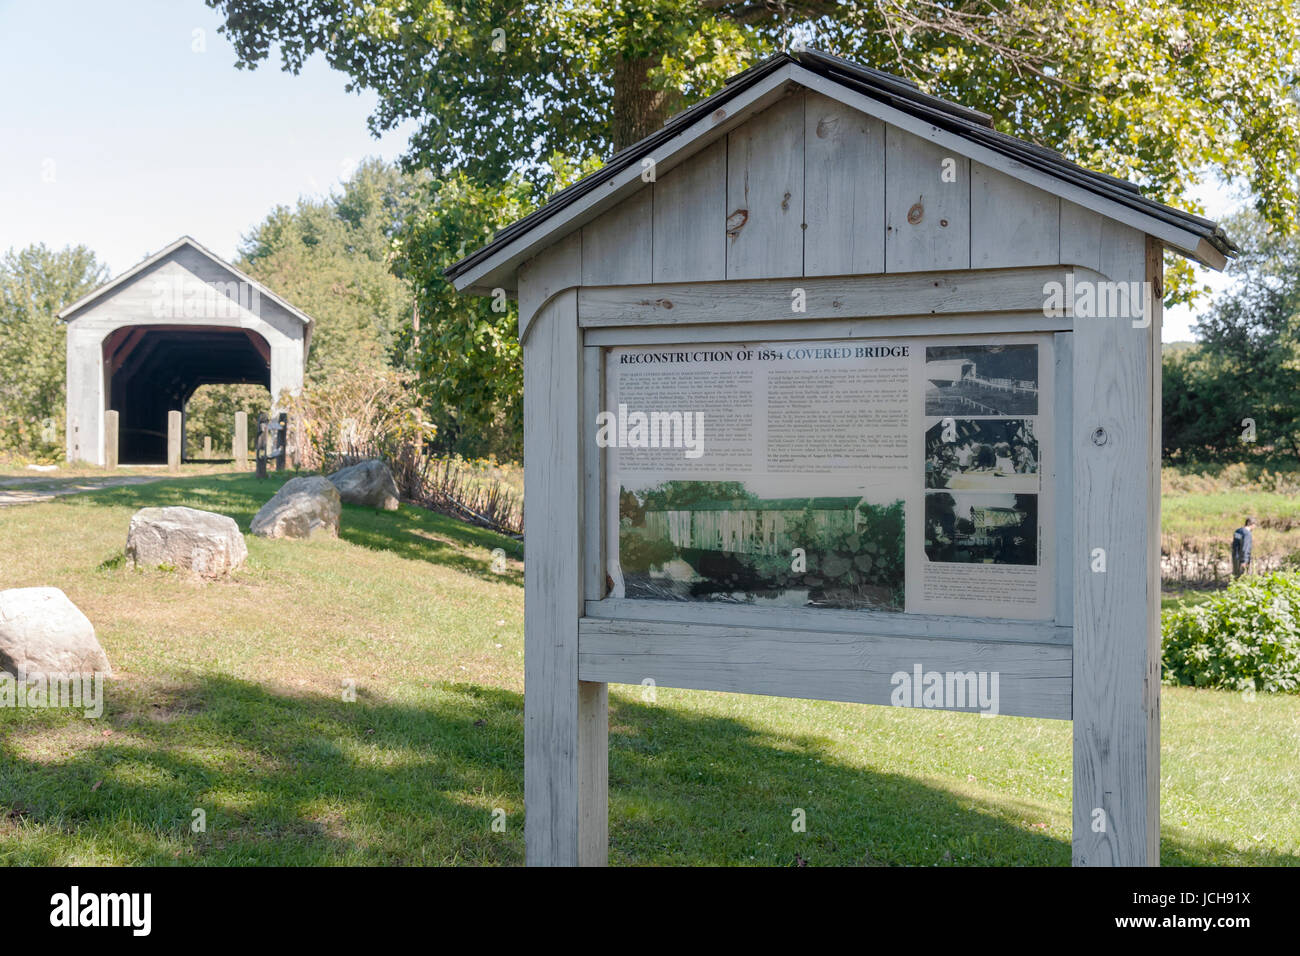 Old Covered bridge, 1854, oldest covered bridge in Sheffield, MA. Restored in 1998. 100 ft. spans Housatonic River. Natl. Register of Historic Places. Stock Photo